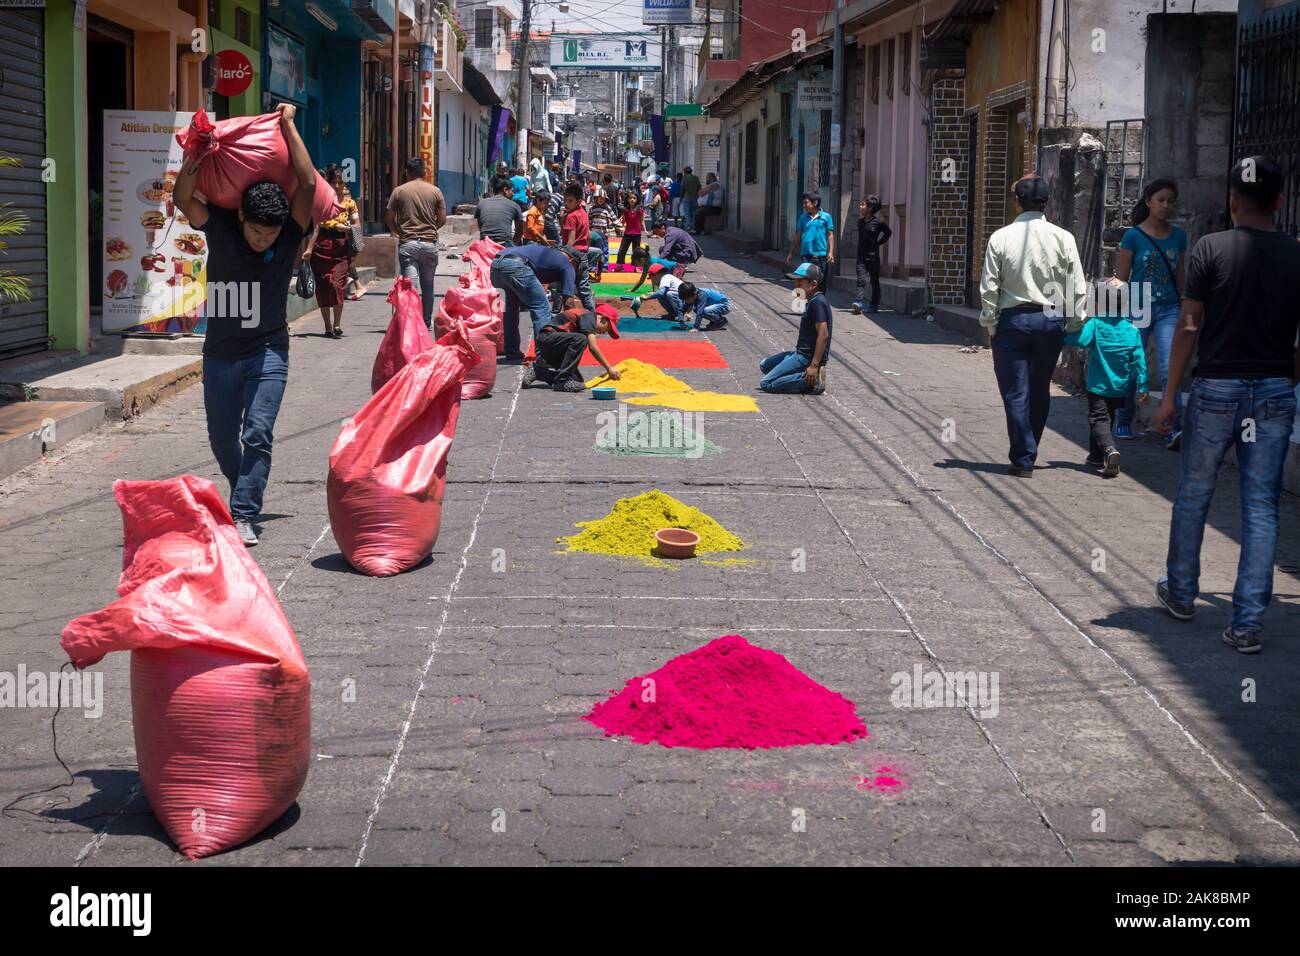 Santiago Atitlan, Guatemala - 30 March 2018: Local people making alfombras with colorful sawdust bags for Semana Santa, Easter on the street Stock Photo